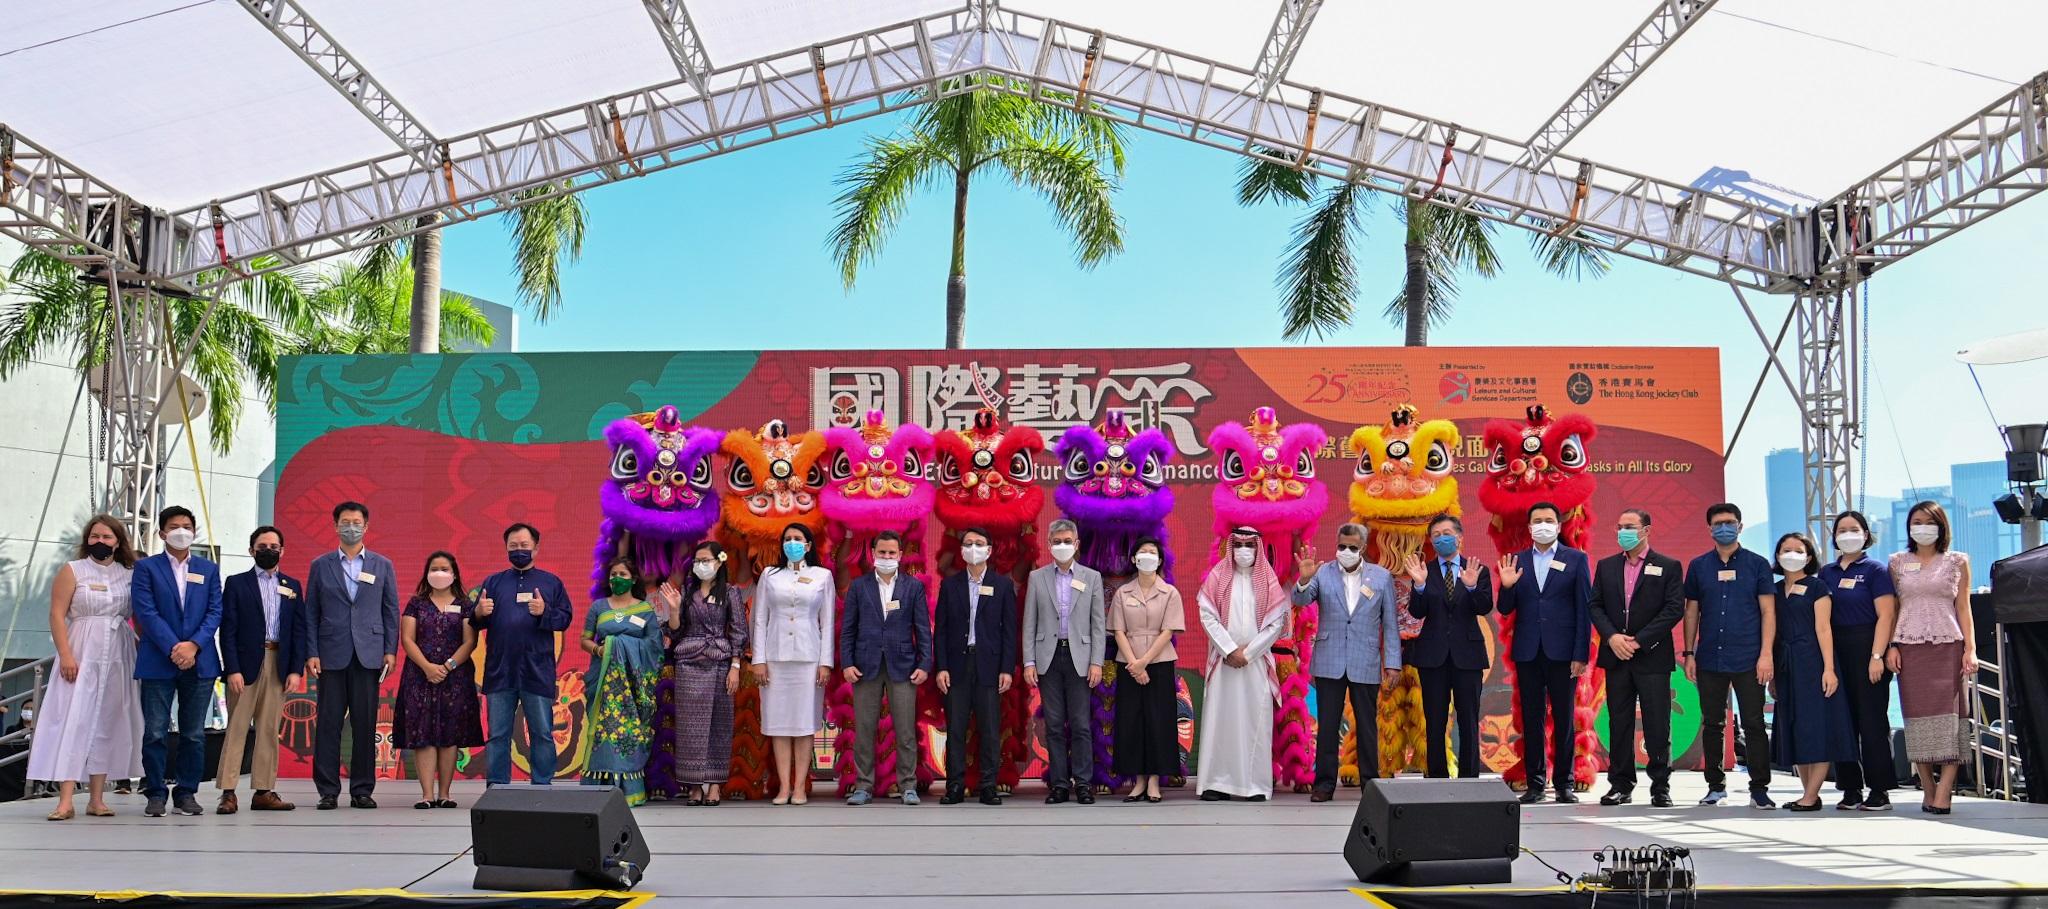 The Leisure and Cultural Services Department held the International Ethnic Cultural Performances at the Hong Kong Cultural Centre Piazza this afternoon (November 13). Photo shows the Under Secretary for Culture, Sports and Tourism, Mr Raistlin Lau (11th right); the Director of Leisure and Cultural Services, Mr Vincent Liu (12th  right); the Executive Manager, Charities (Sports and Culture) of the Hong Kong Jockey Club, Ms Donna Tang (10th right); and representatives from Consulates-General of various countries officiating at today's lion dance eye-dotting ceremony.